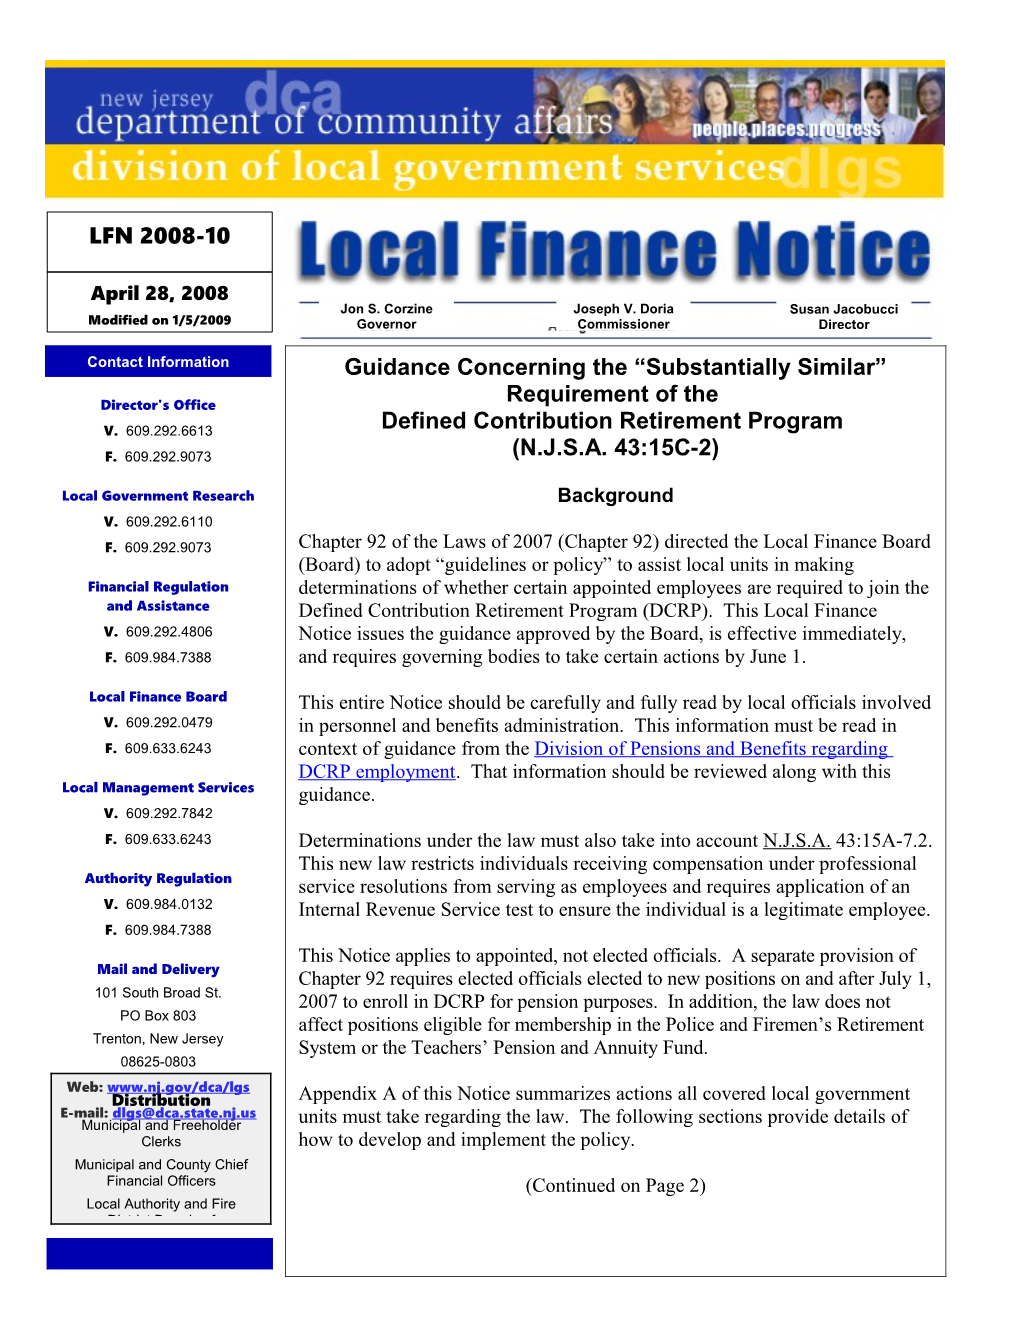 Local Finance Notice 2008-10April 29, 2008 (As Modified on 1/5/09)Page 1